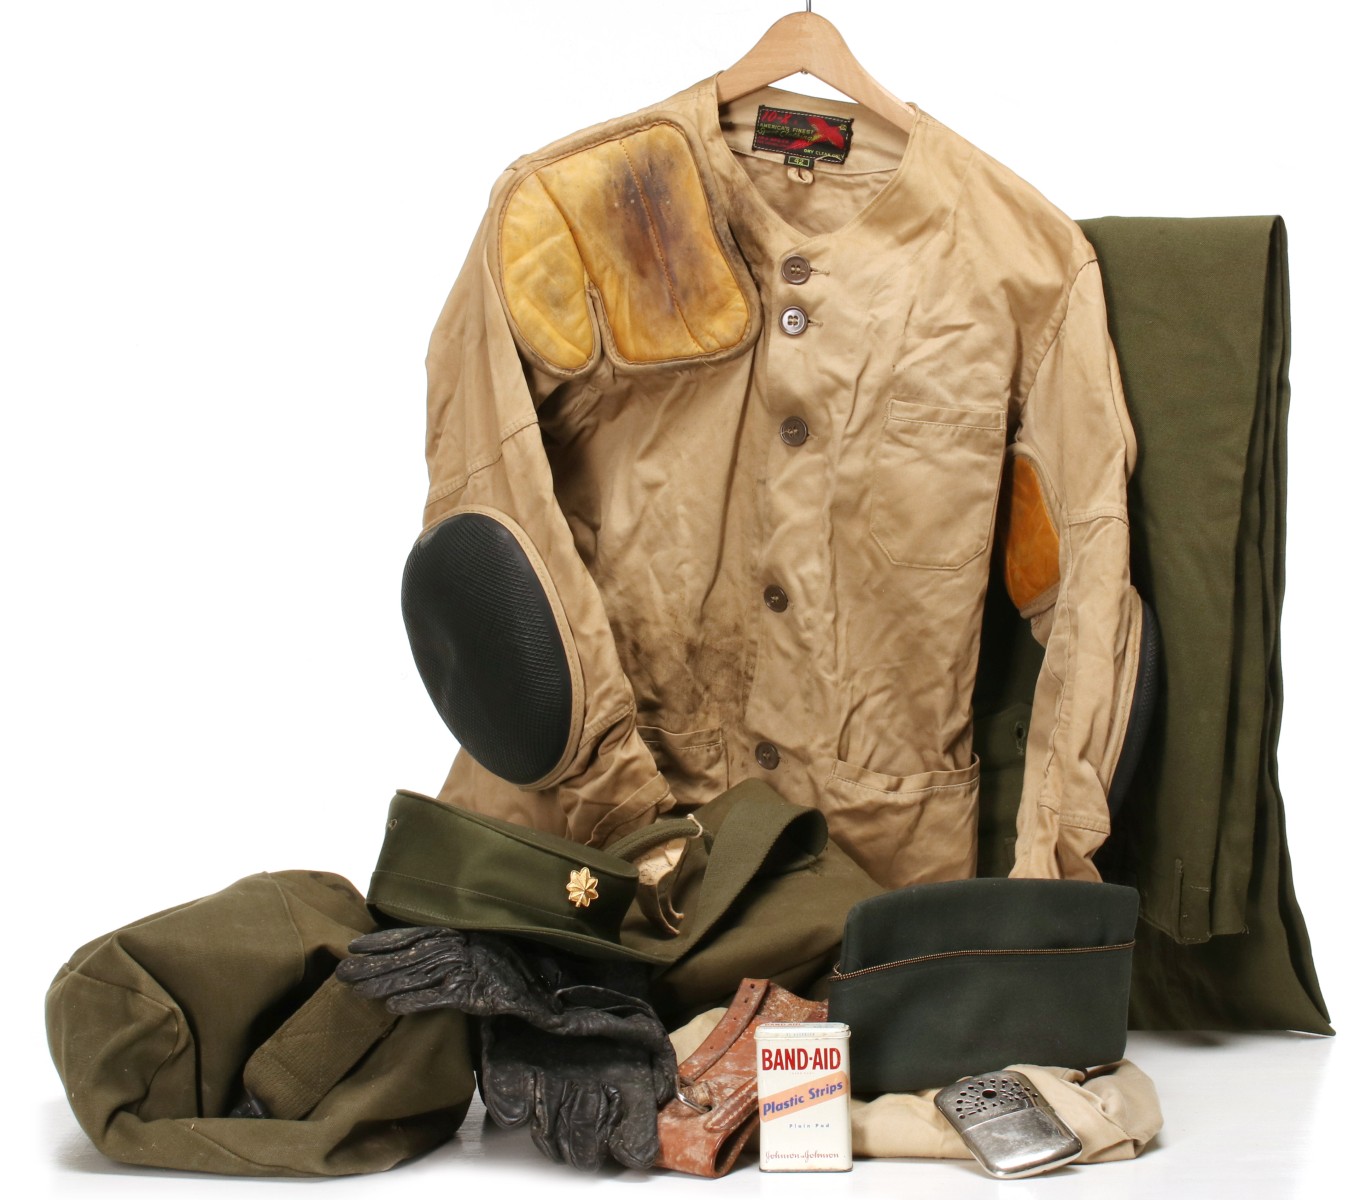 1ST LT J. ANGOLIA PERSONAL GEAR 82ND AIRBORNE